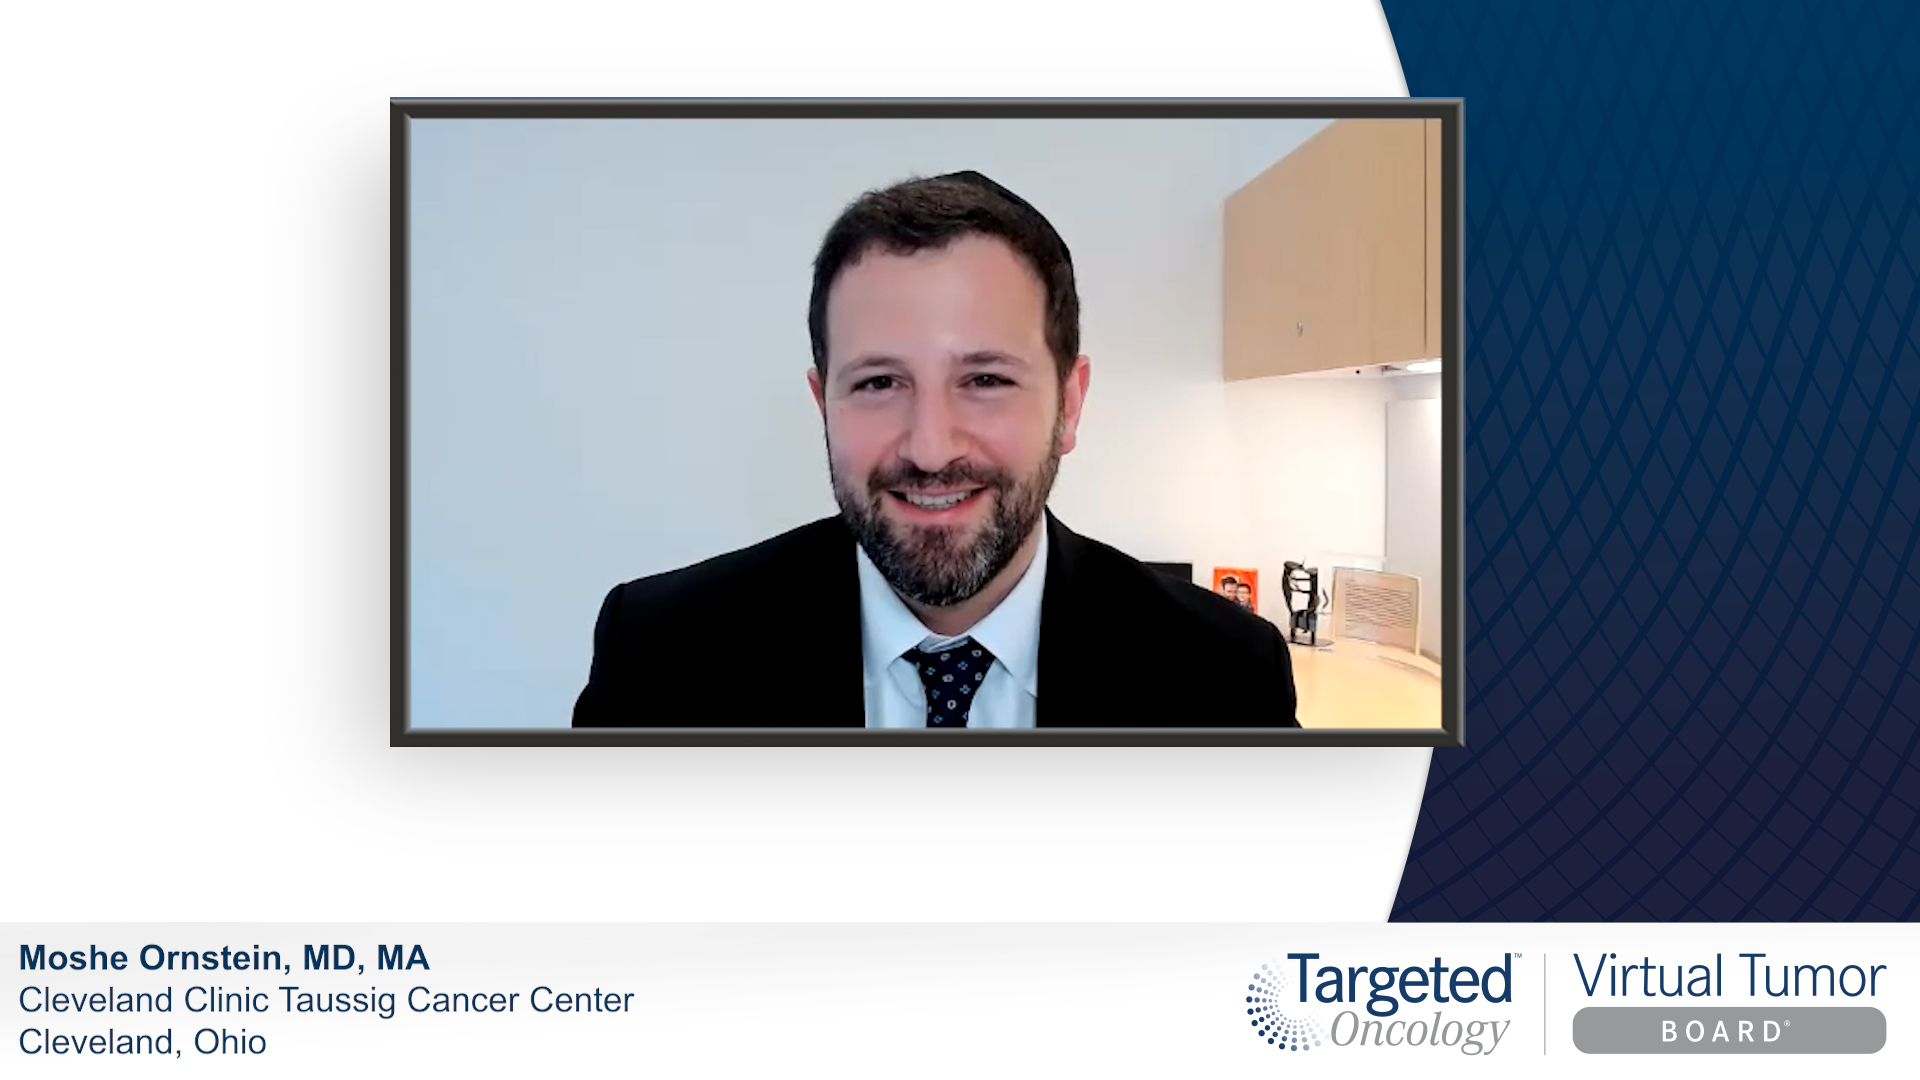 Advanced Clear Cell RCC and the KEYNOTE 426 Trial